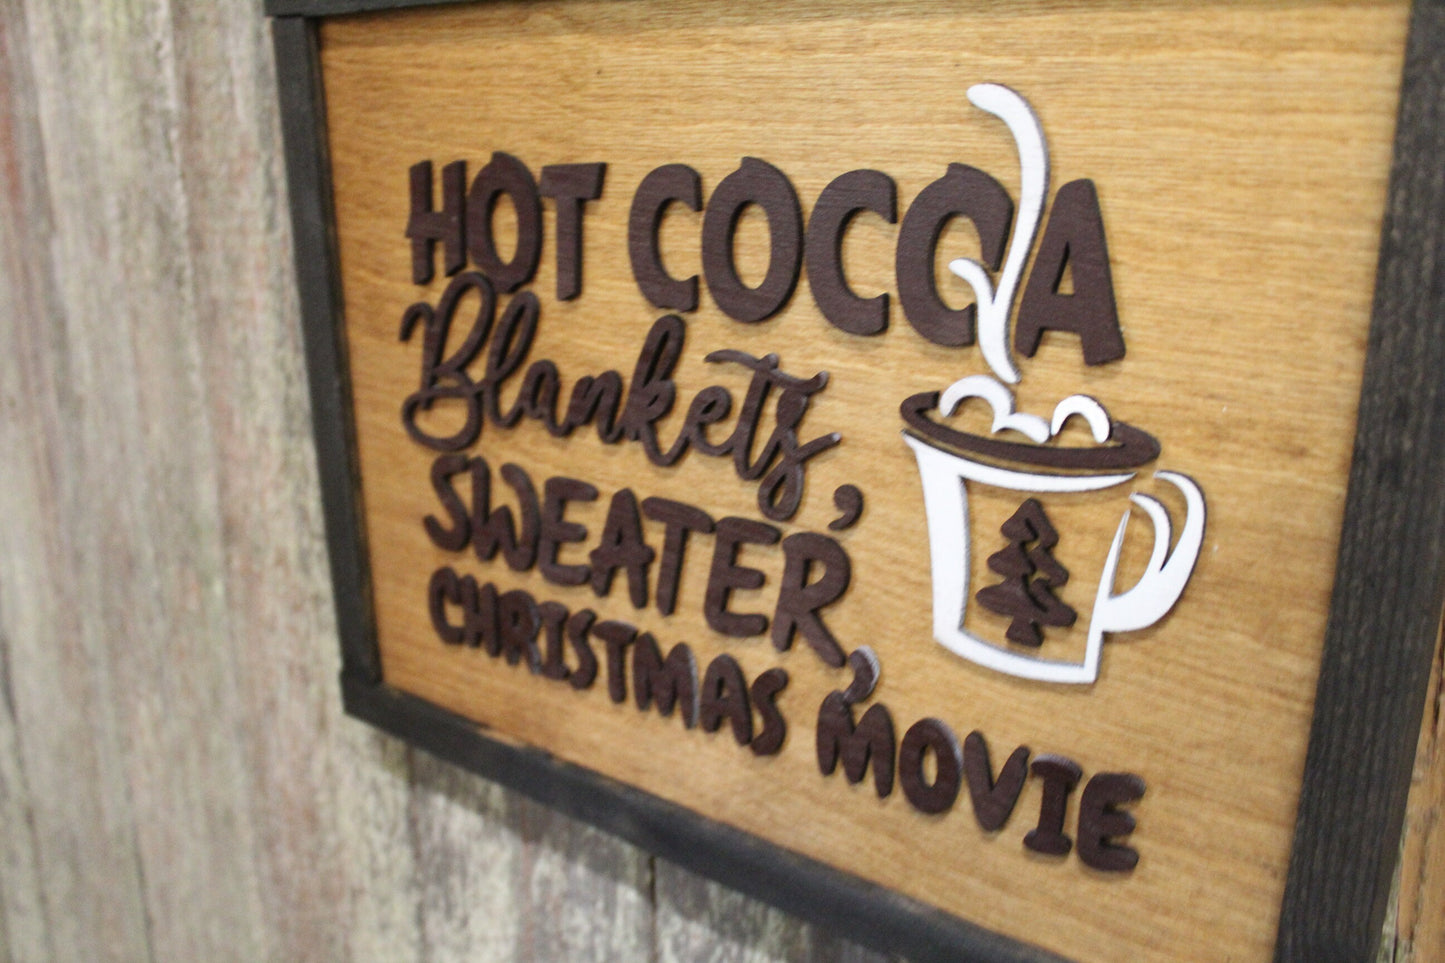 Hot Cocoa Wood Sign Blankets Sweater Christmas Movie Chocolate Winter Cold 3D Raised Text Country Cabin Decor Mug Tree Decoration Wall Art